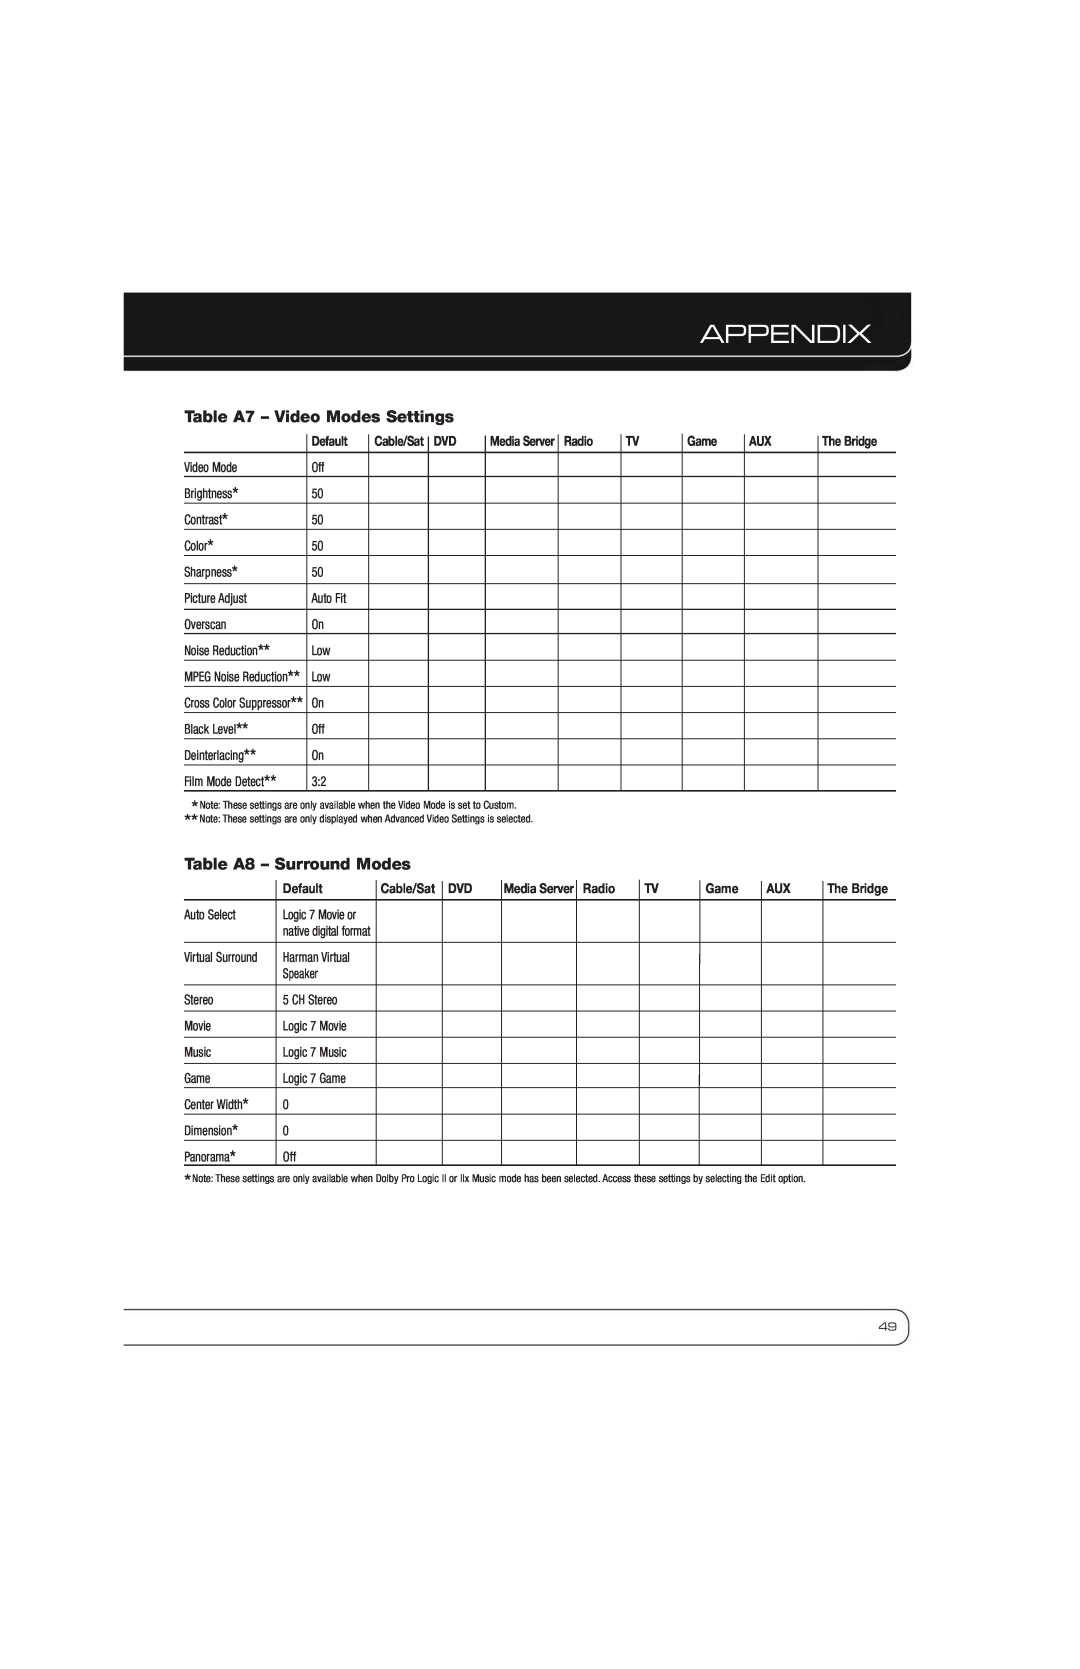 Harman AVR 2600 owner manual Table A7 - Video Modes Settings, Table A8 - Surround Modes, Appendix 